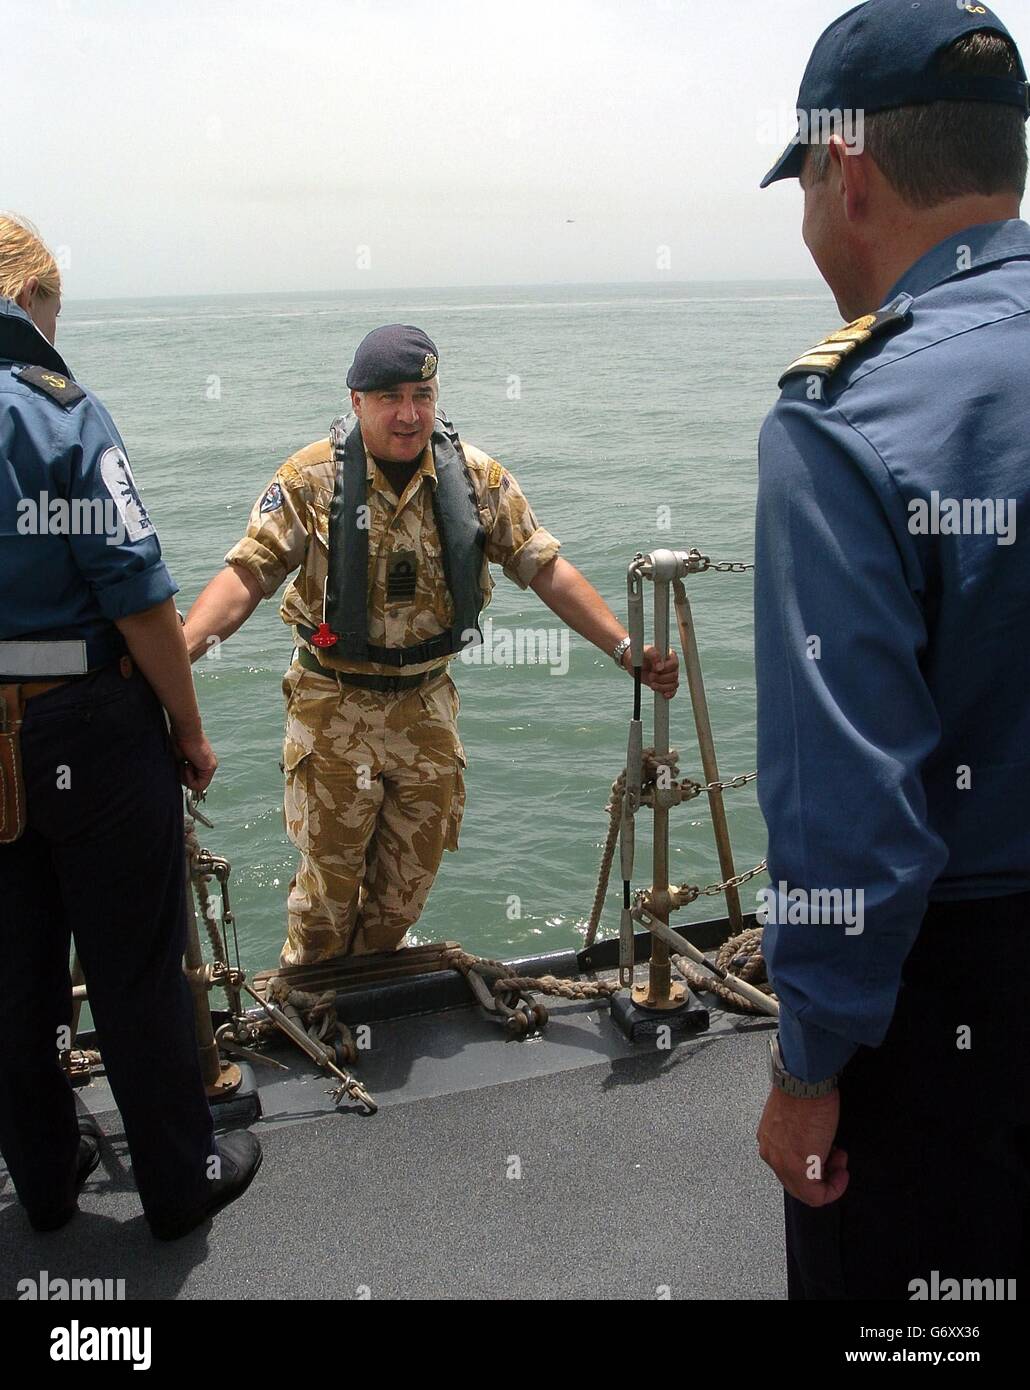 Captain John Murphie arrives on HMS Grafton to launch the first two vessels for the newly-formed Iraqi Coastal Defence Force. The Type 23 Frigate is currently patrolling the waters off the coast of Iraq. The first vessels belonging to a ICDF were officially launched today. The coalition hopes the ICDF, which is described as 'more than a coastguard but without the attack capacity of a navy', will eventually take over responsibility for security in Iraqi waters. Stock Photo